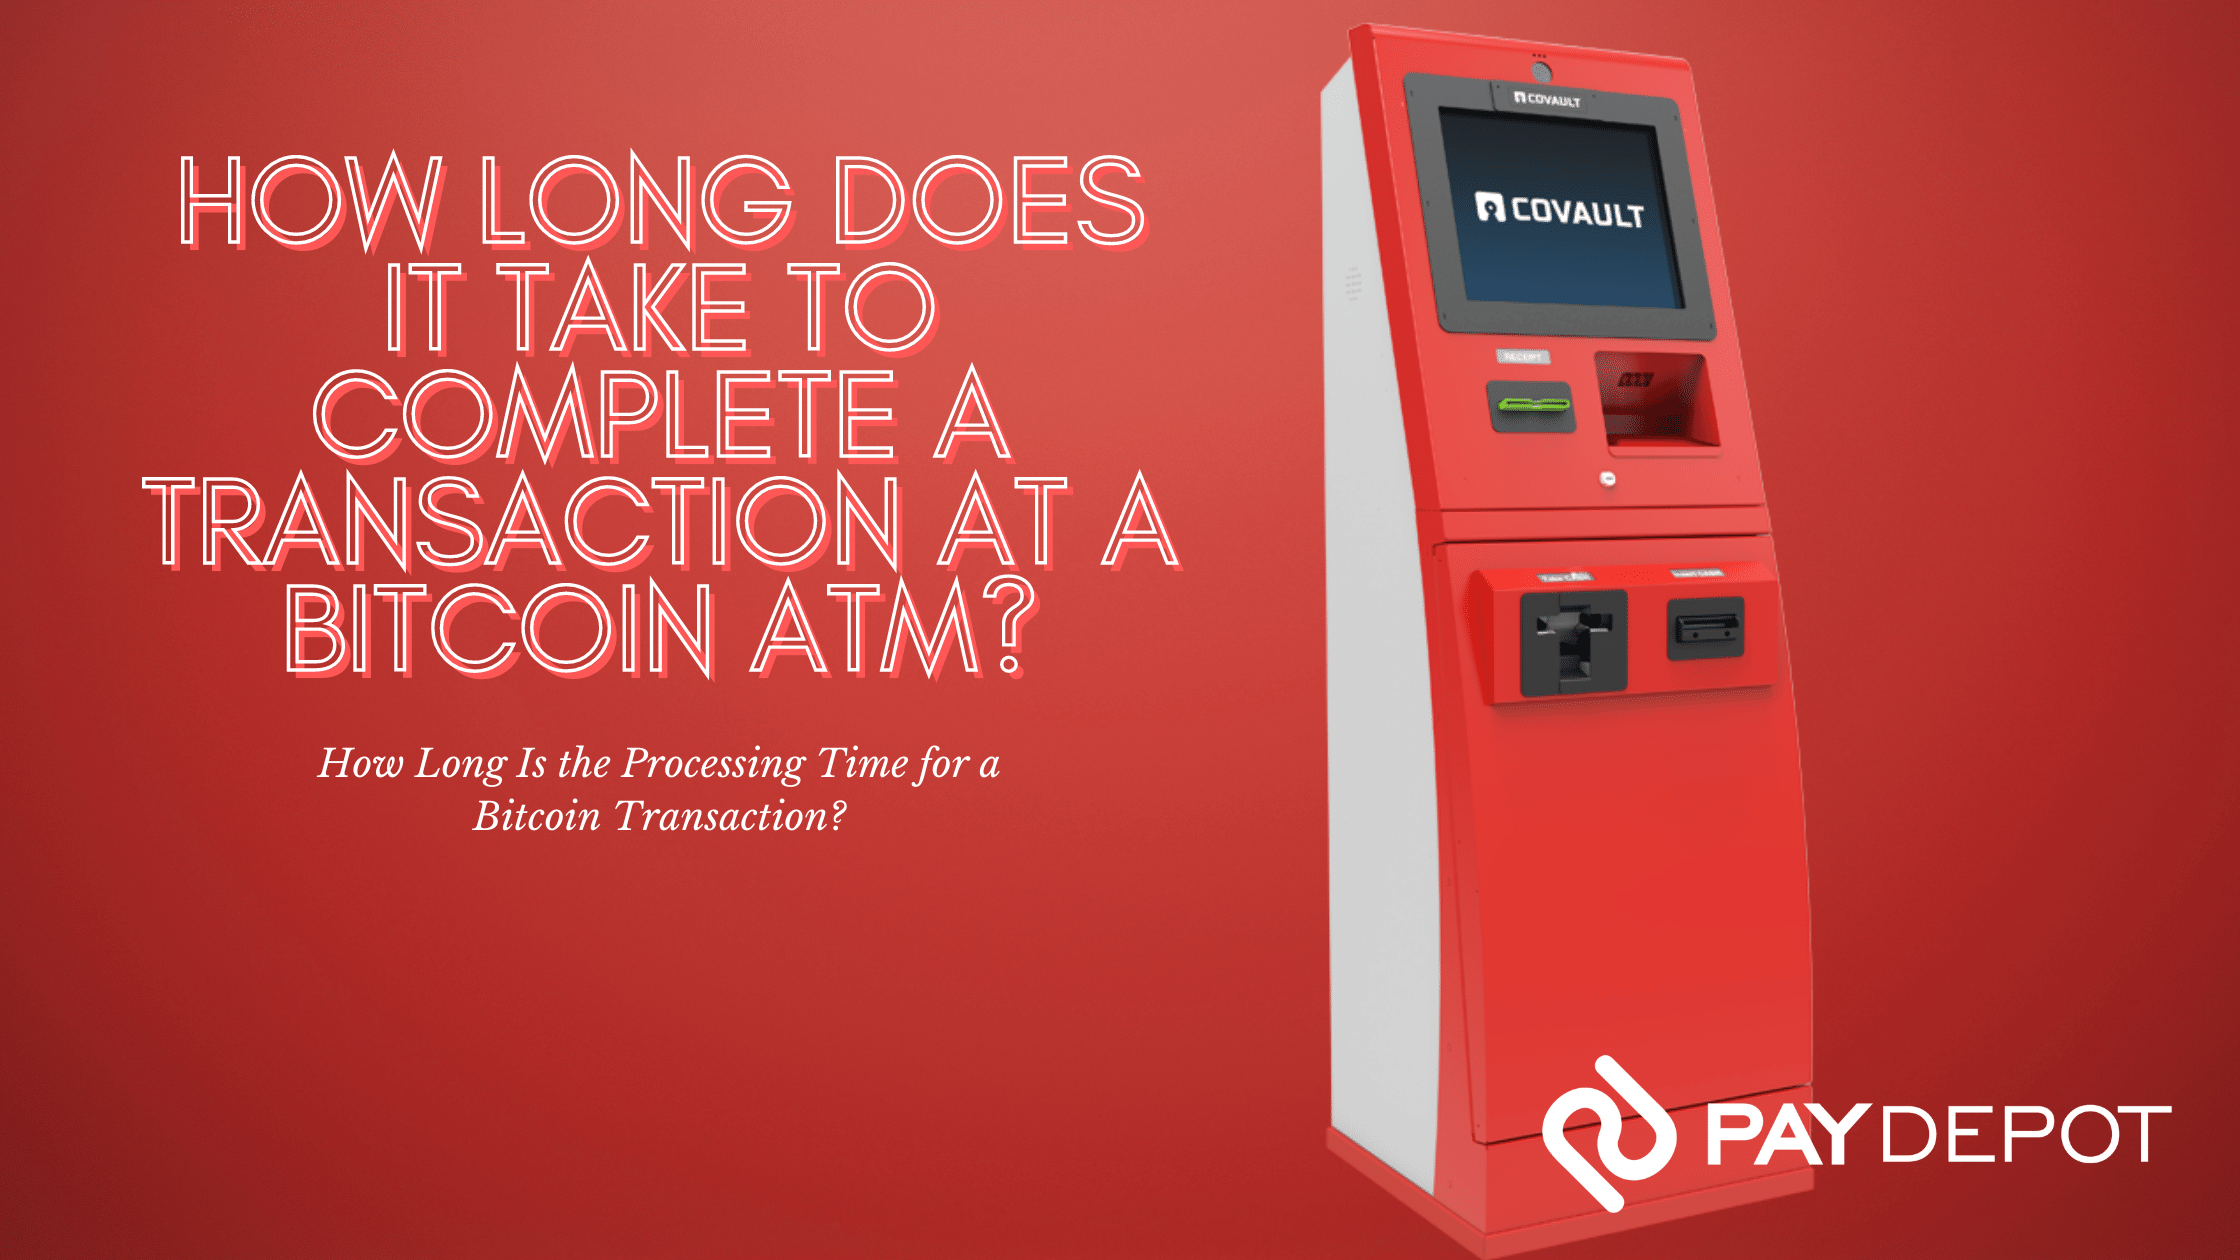 How Long Does It Take to Complete a Transaction at a Bitcoin ATM?